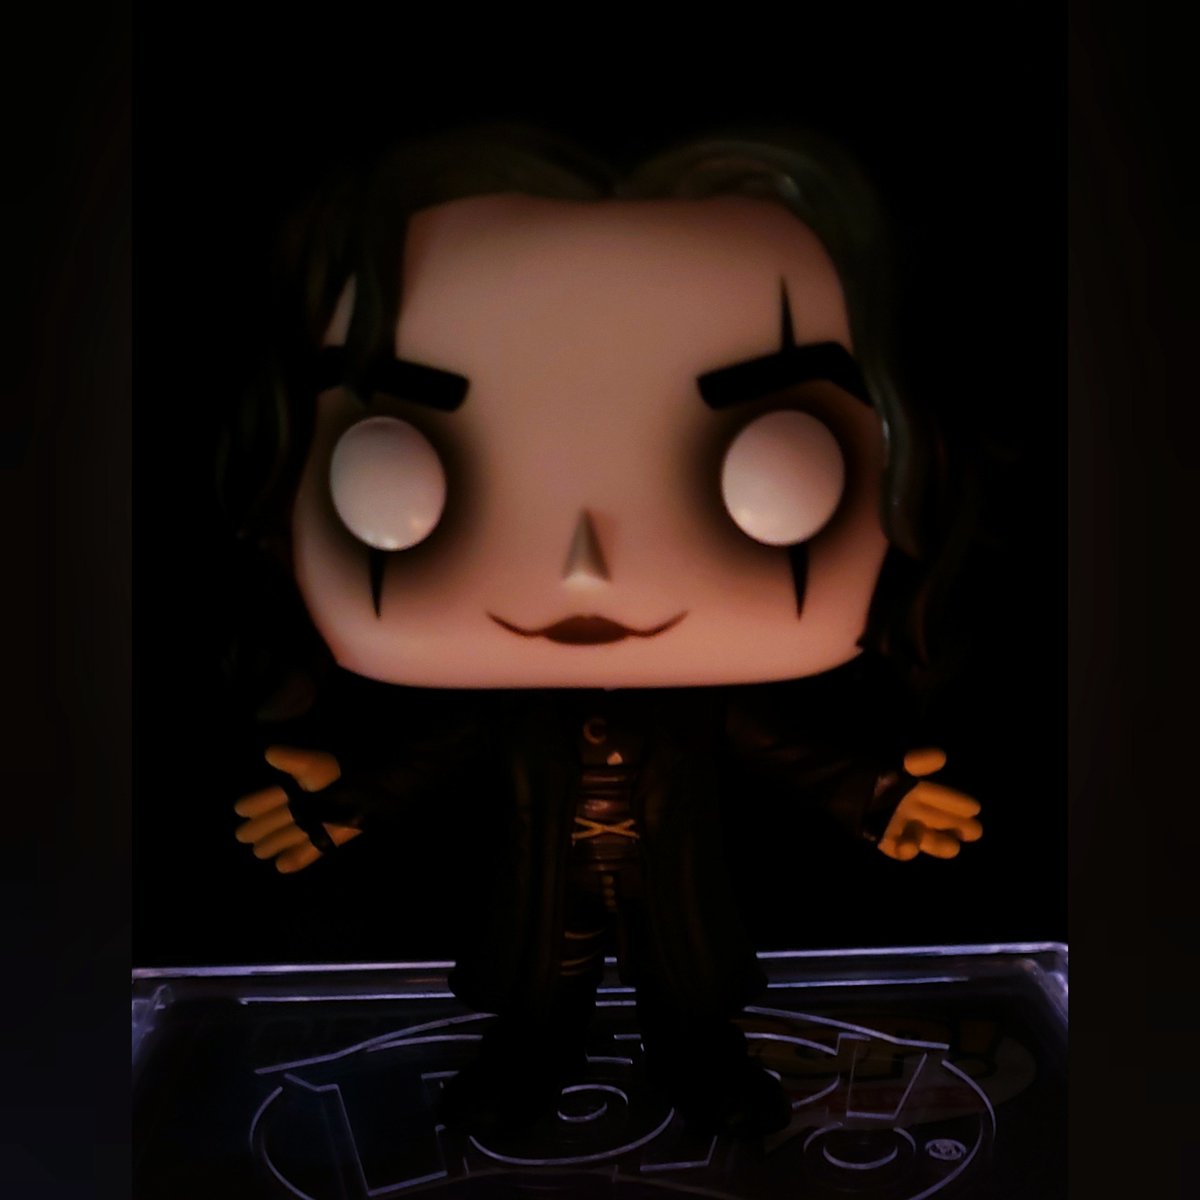 'It can't rain all the time.'
#thecrow #ericdraven #allhallowseve #funko #funkopop #bizzaro13